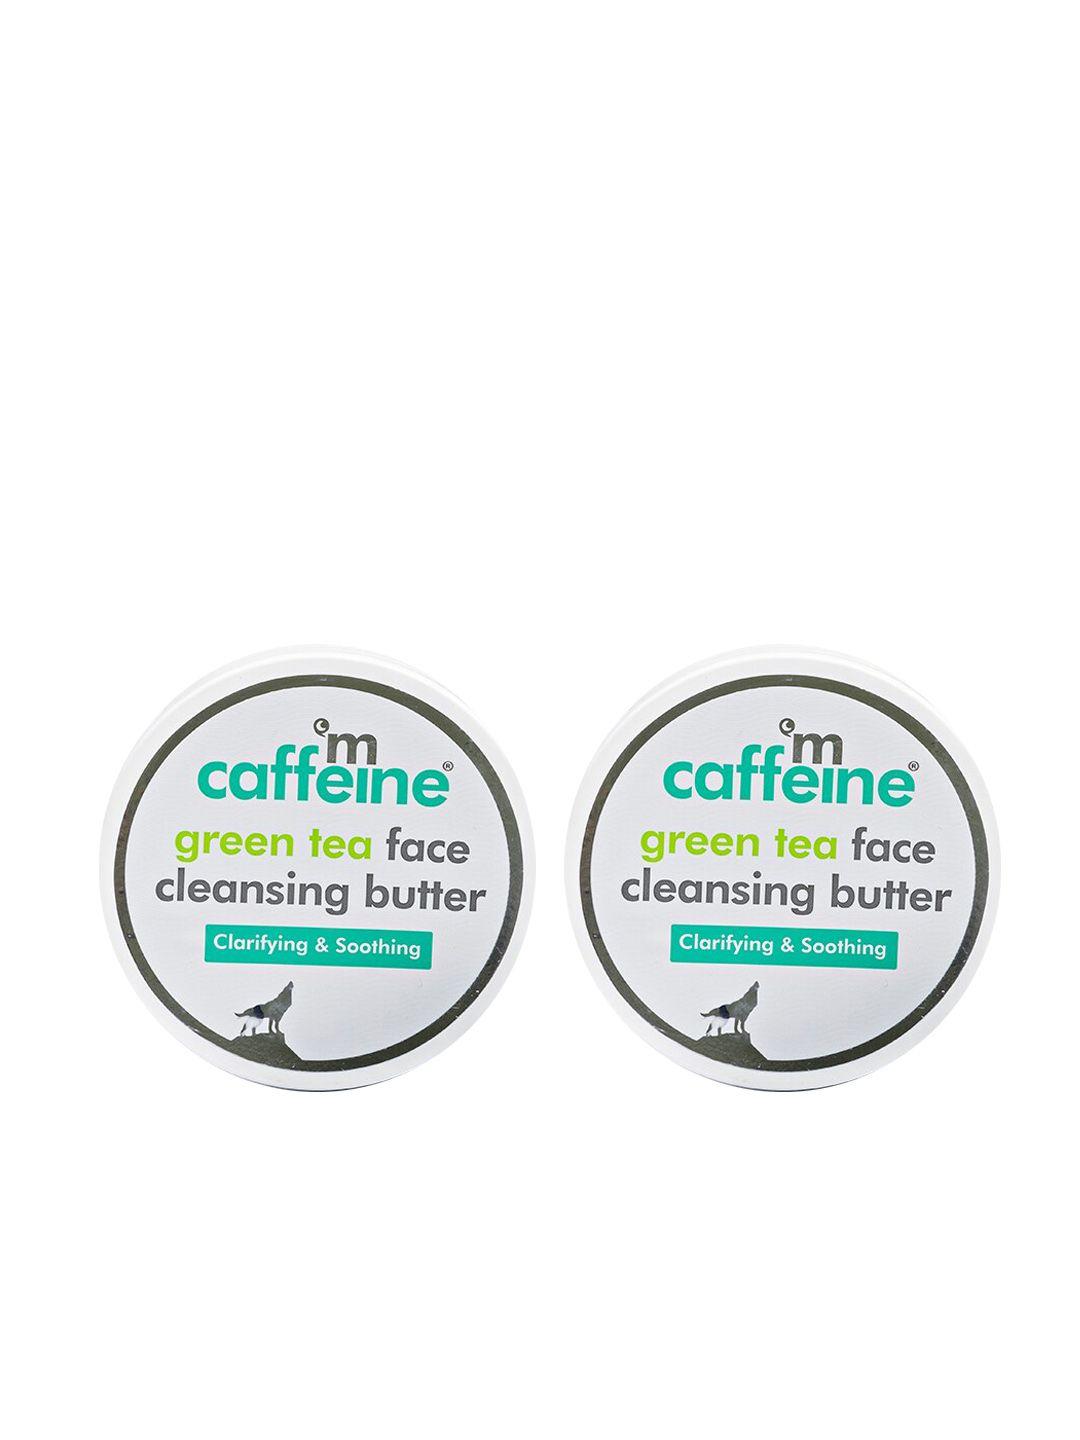 mcaffeine set of 2 green tea face cleansing butter for clarifying & smoothening- 100g each